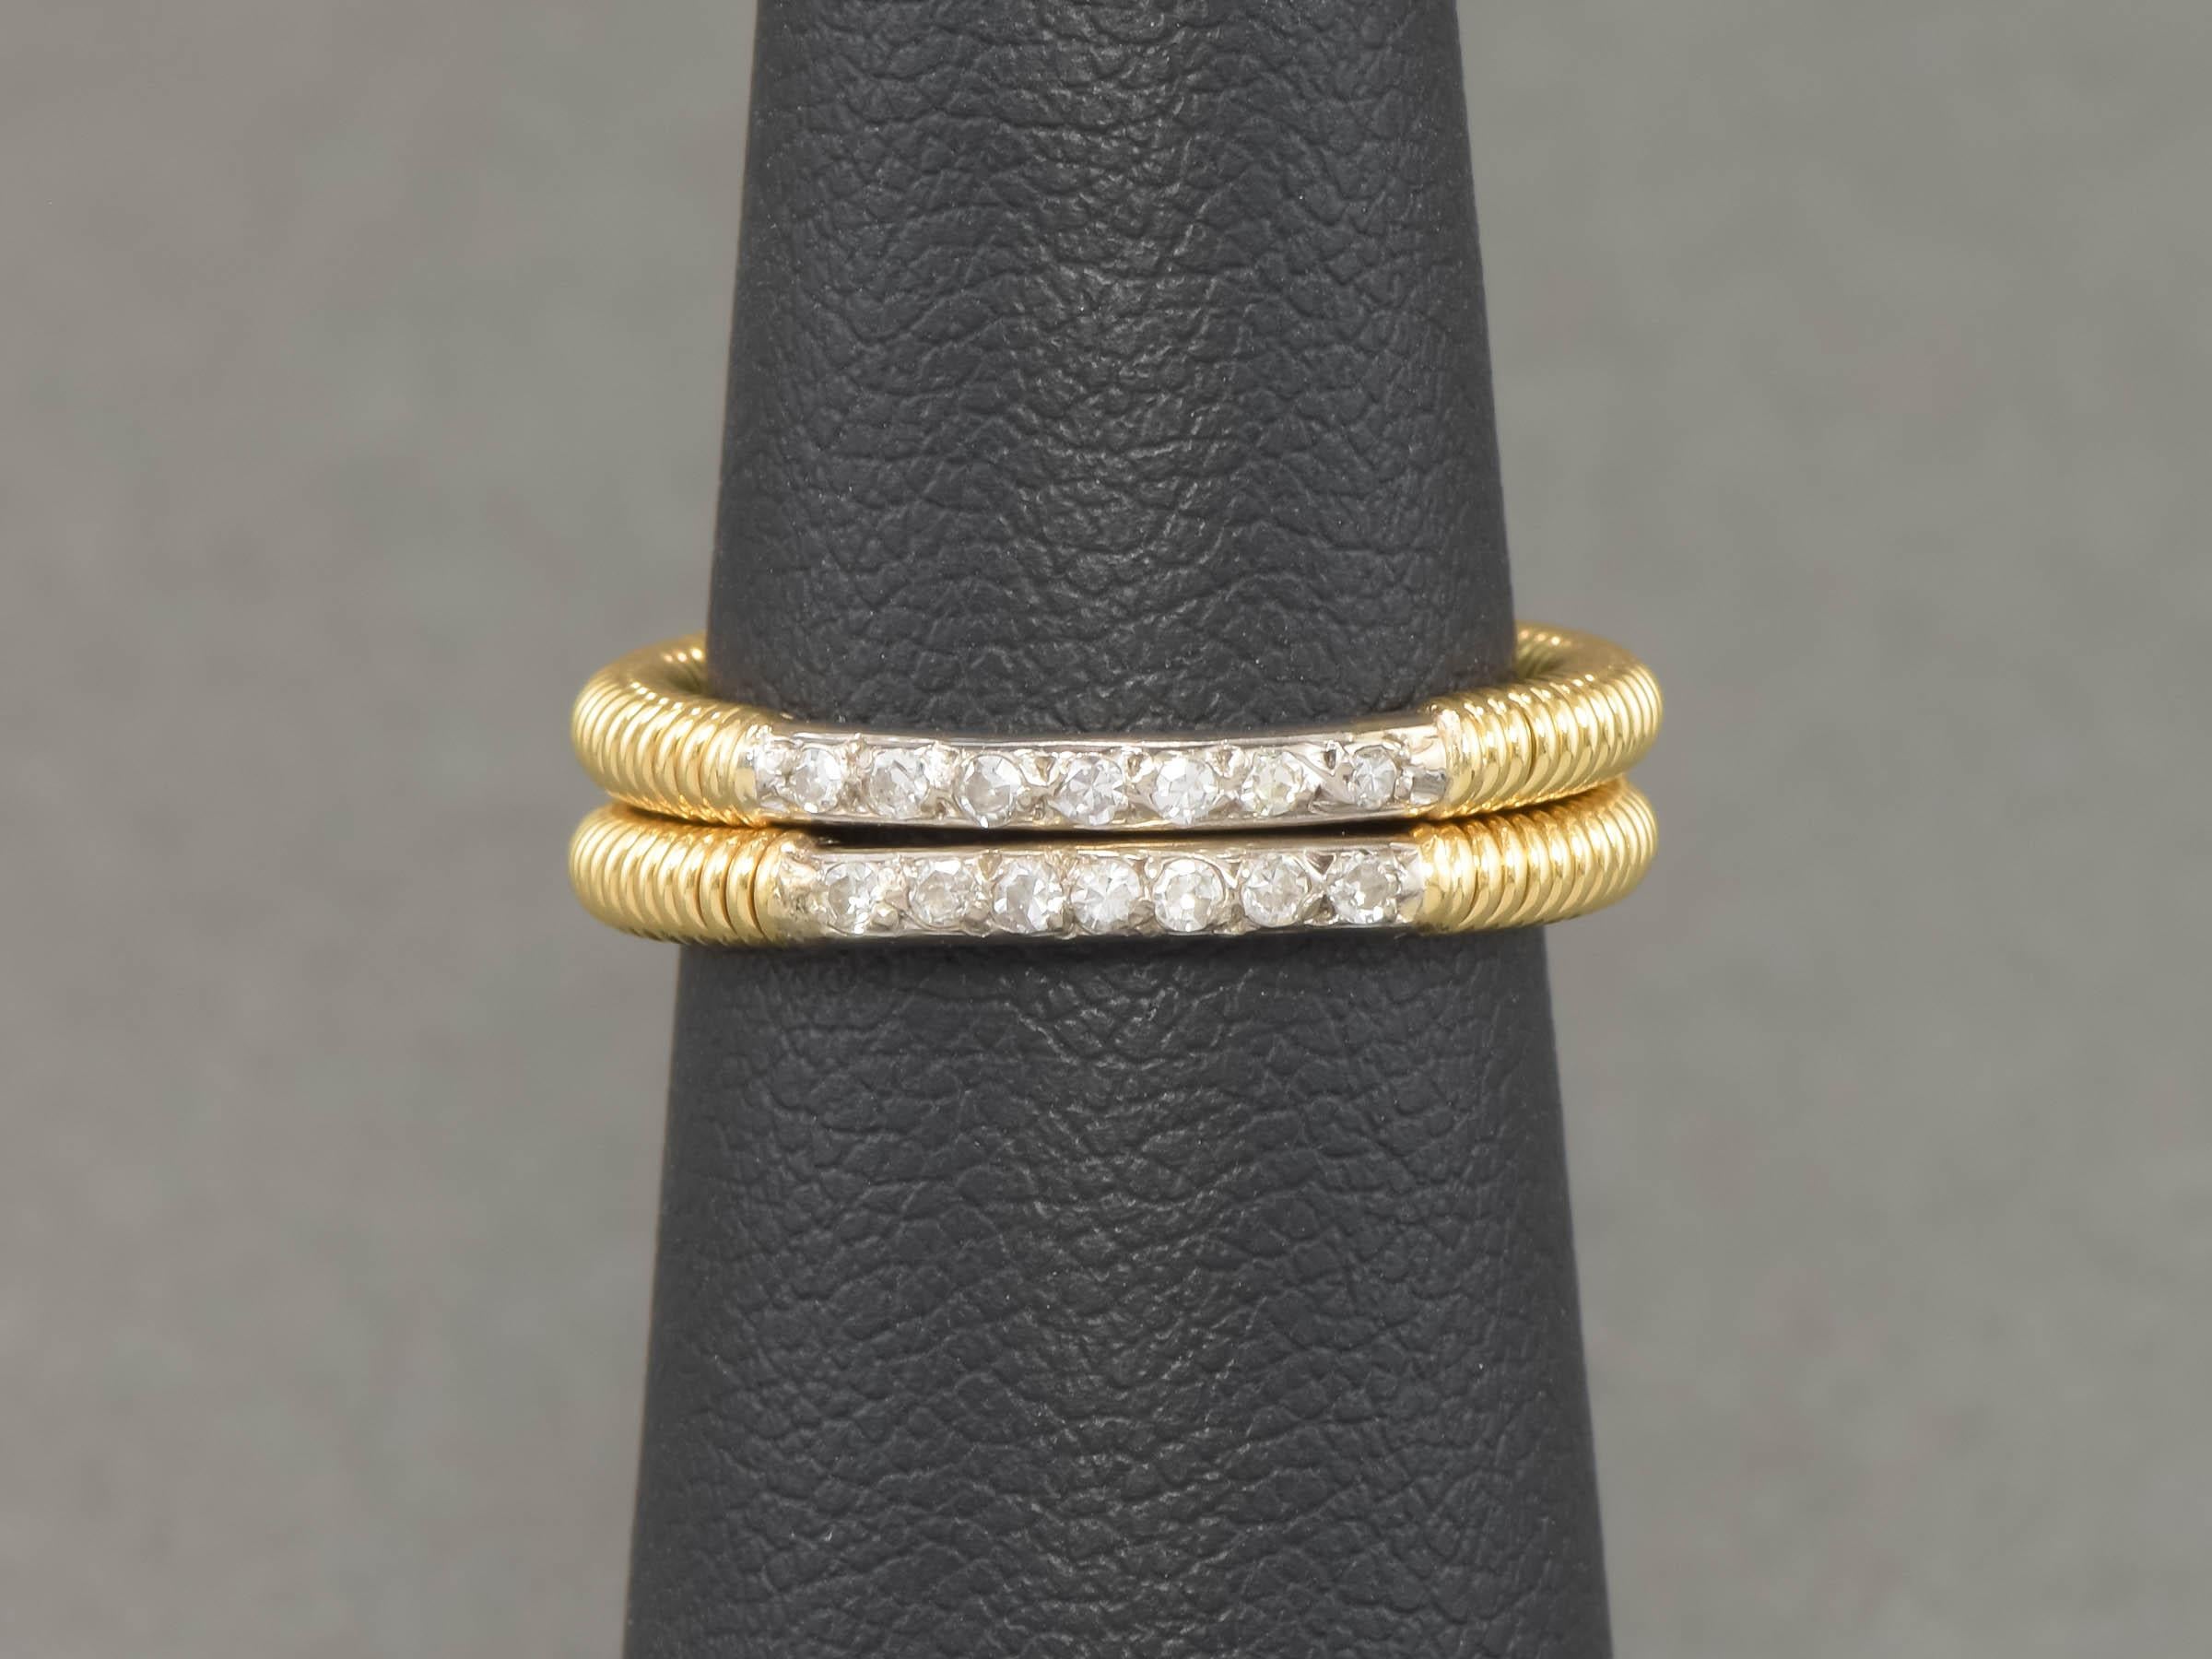 Pair of 18K Gold Diamond Band Rings with Tubogas Look For Sale 5